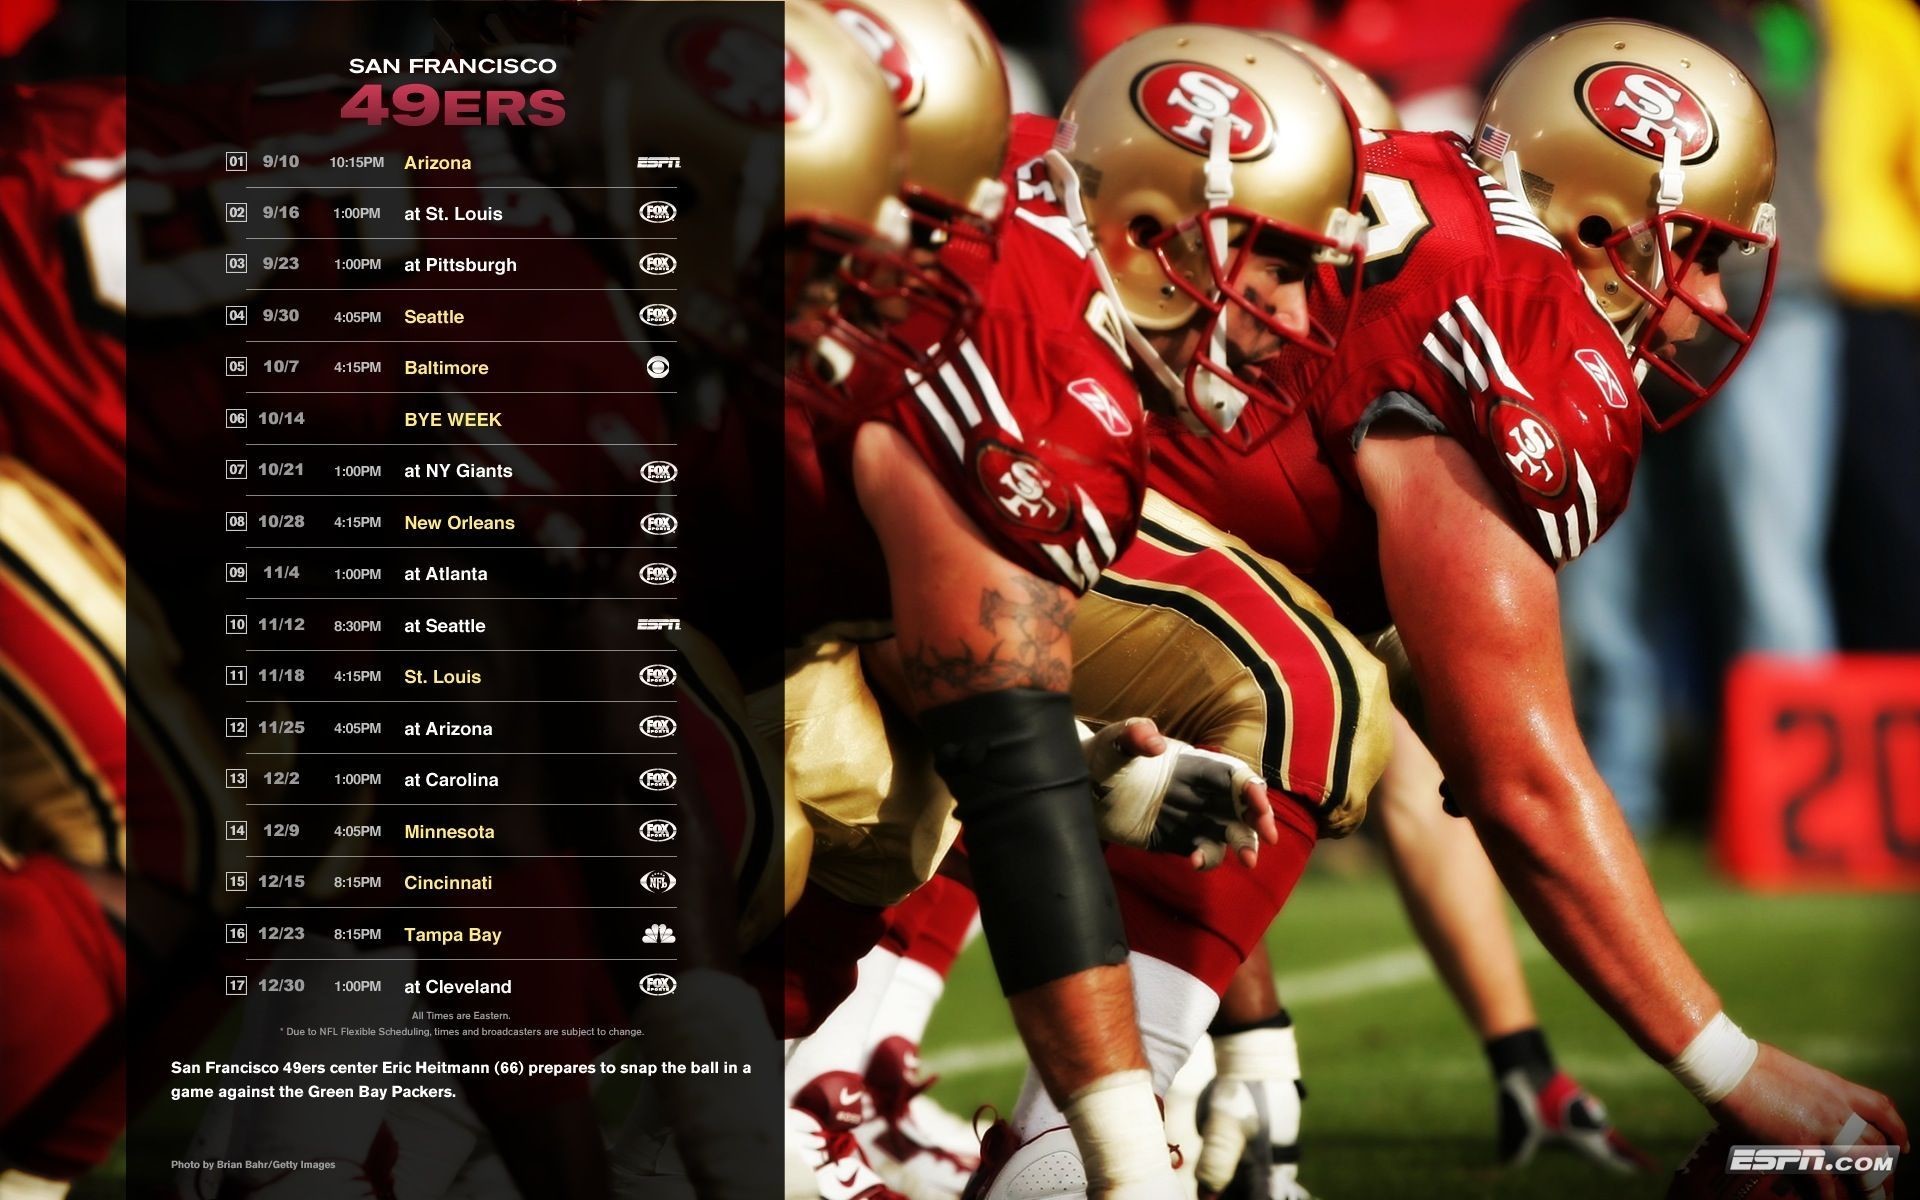 1920x1200 Awesome Sf 49Ers 2014 Schedule Wallpaper These are High Quality and High  Definition HD Wallpapers For